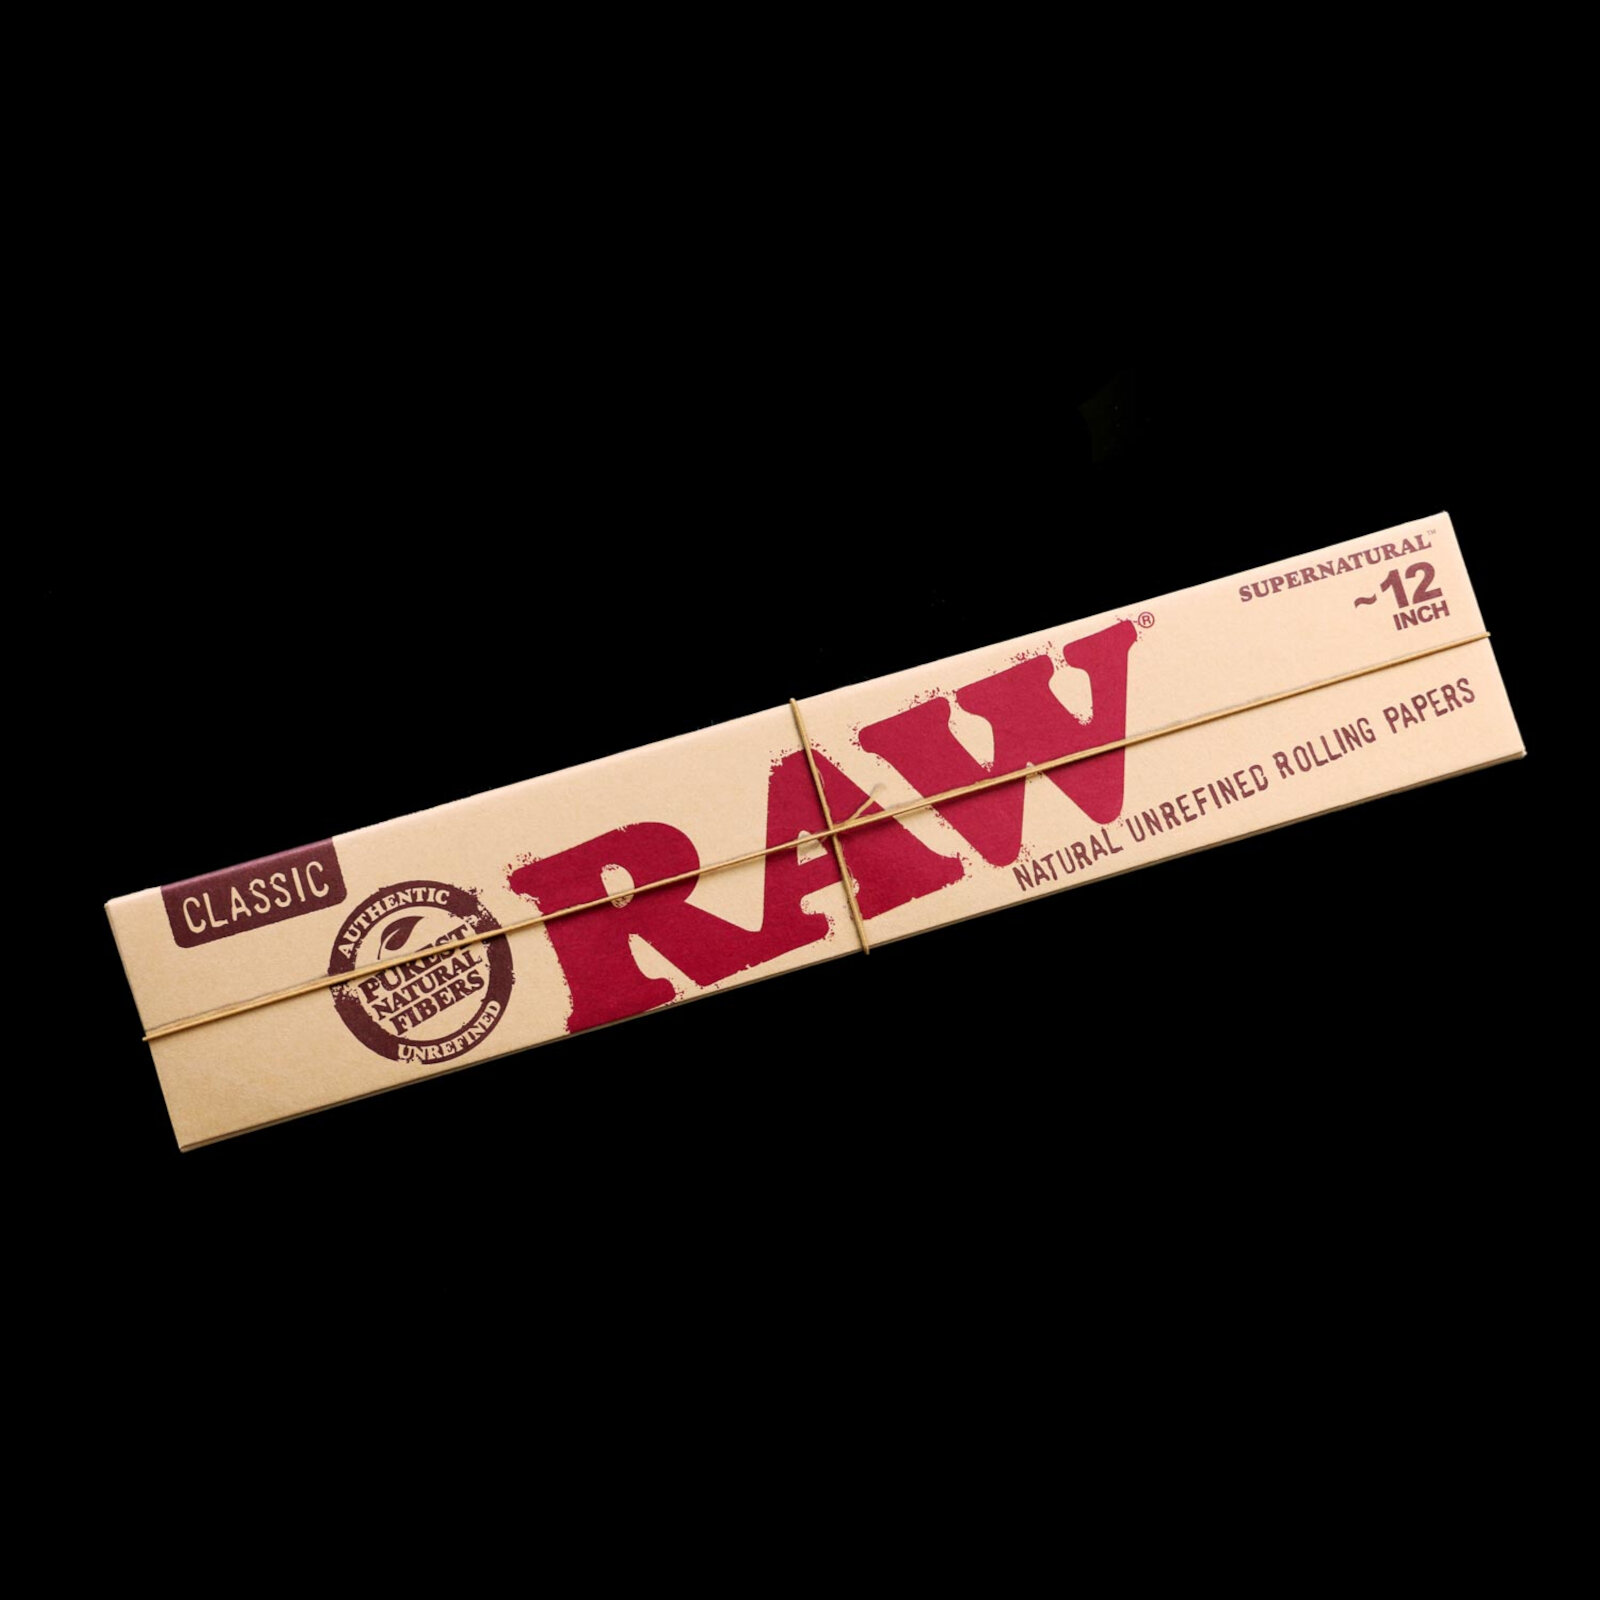 Classic Supernatural 12 Inch Extra Long Rolling Papers